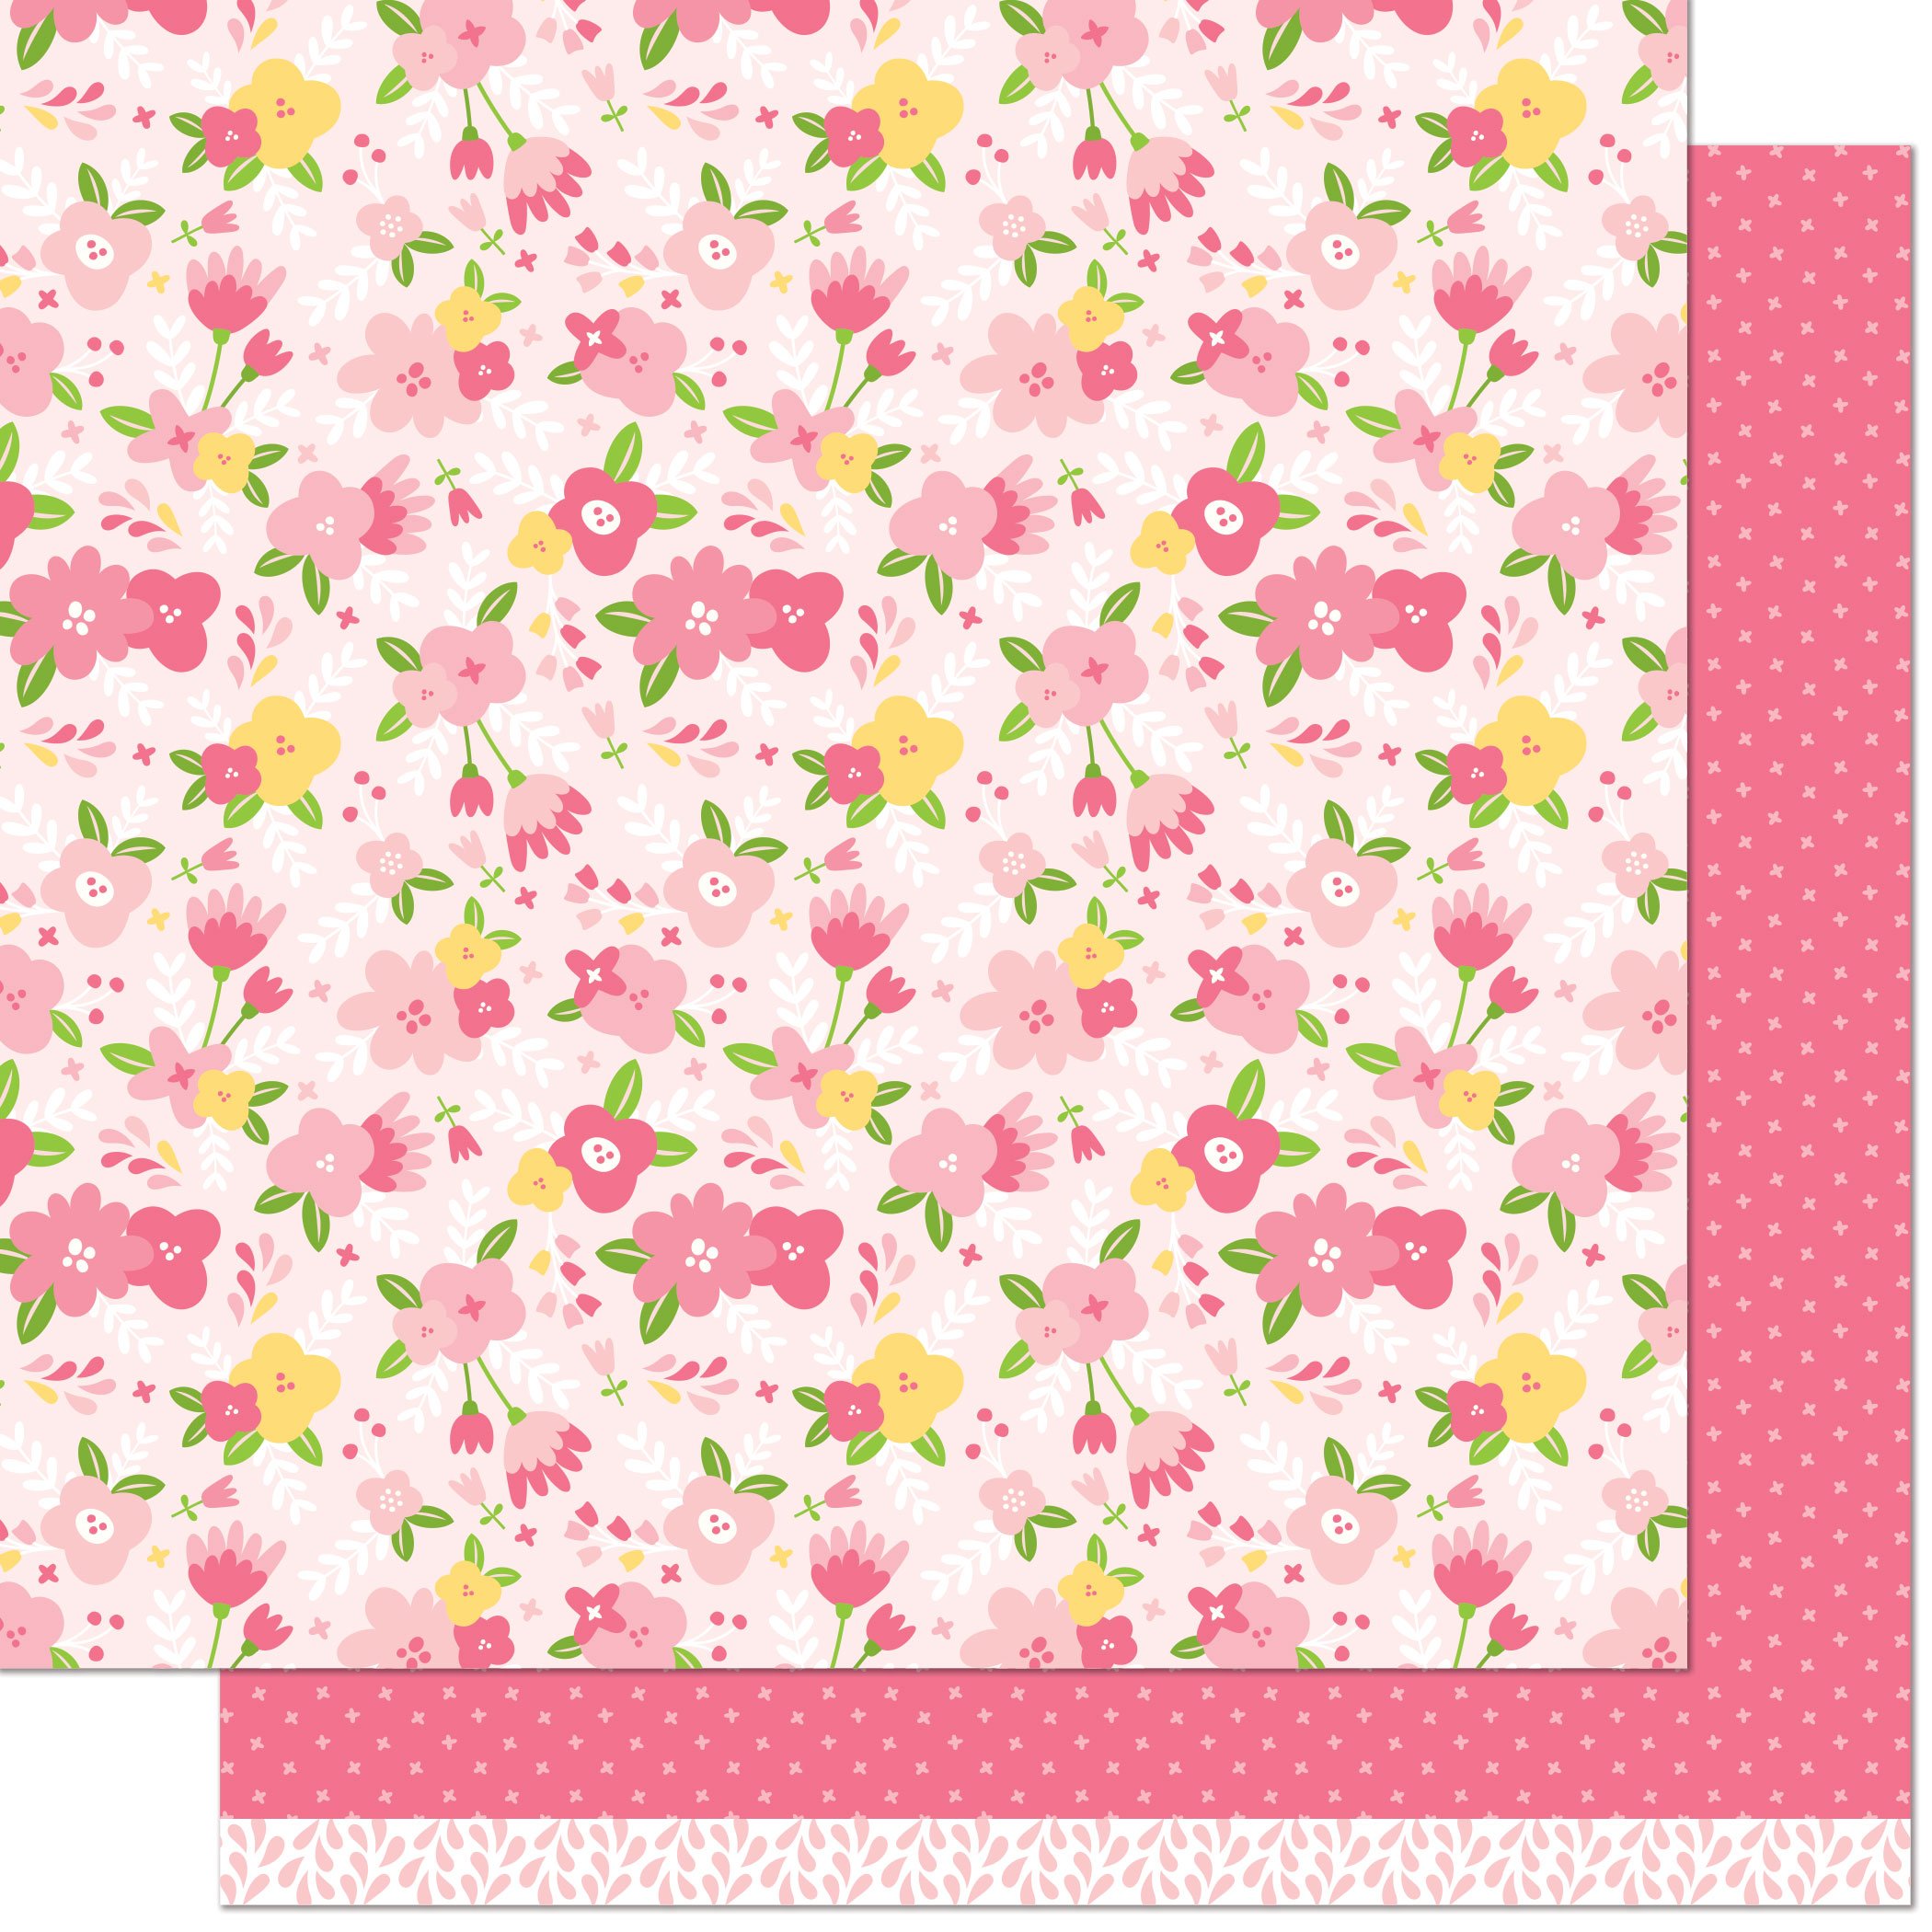  Lawn Fawn papers  debbie